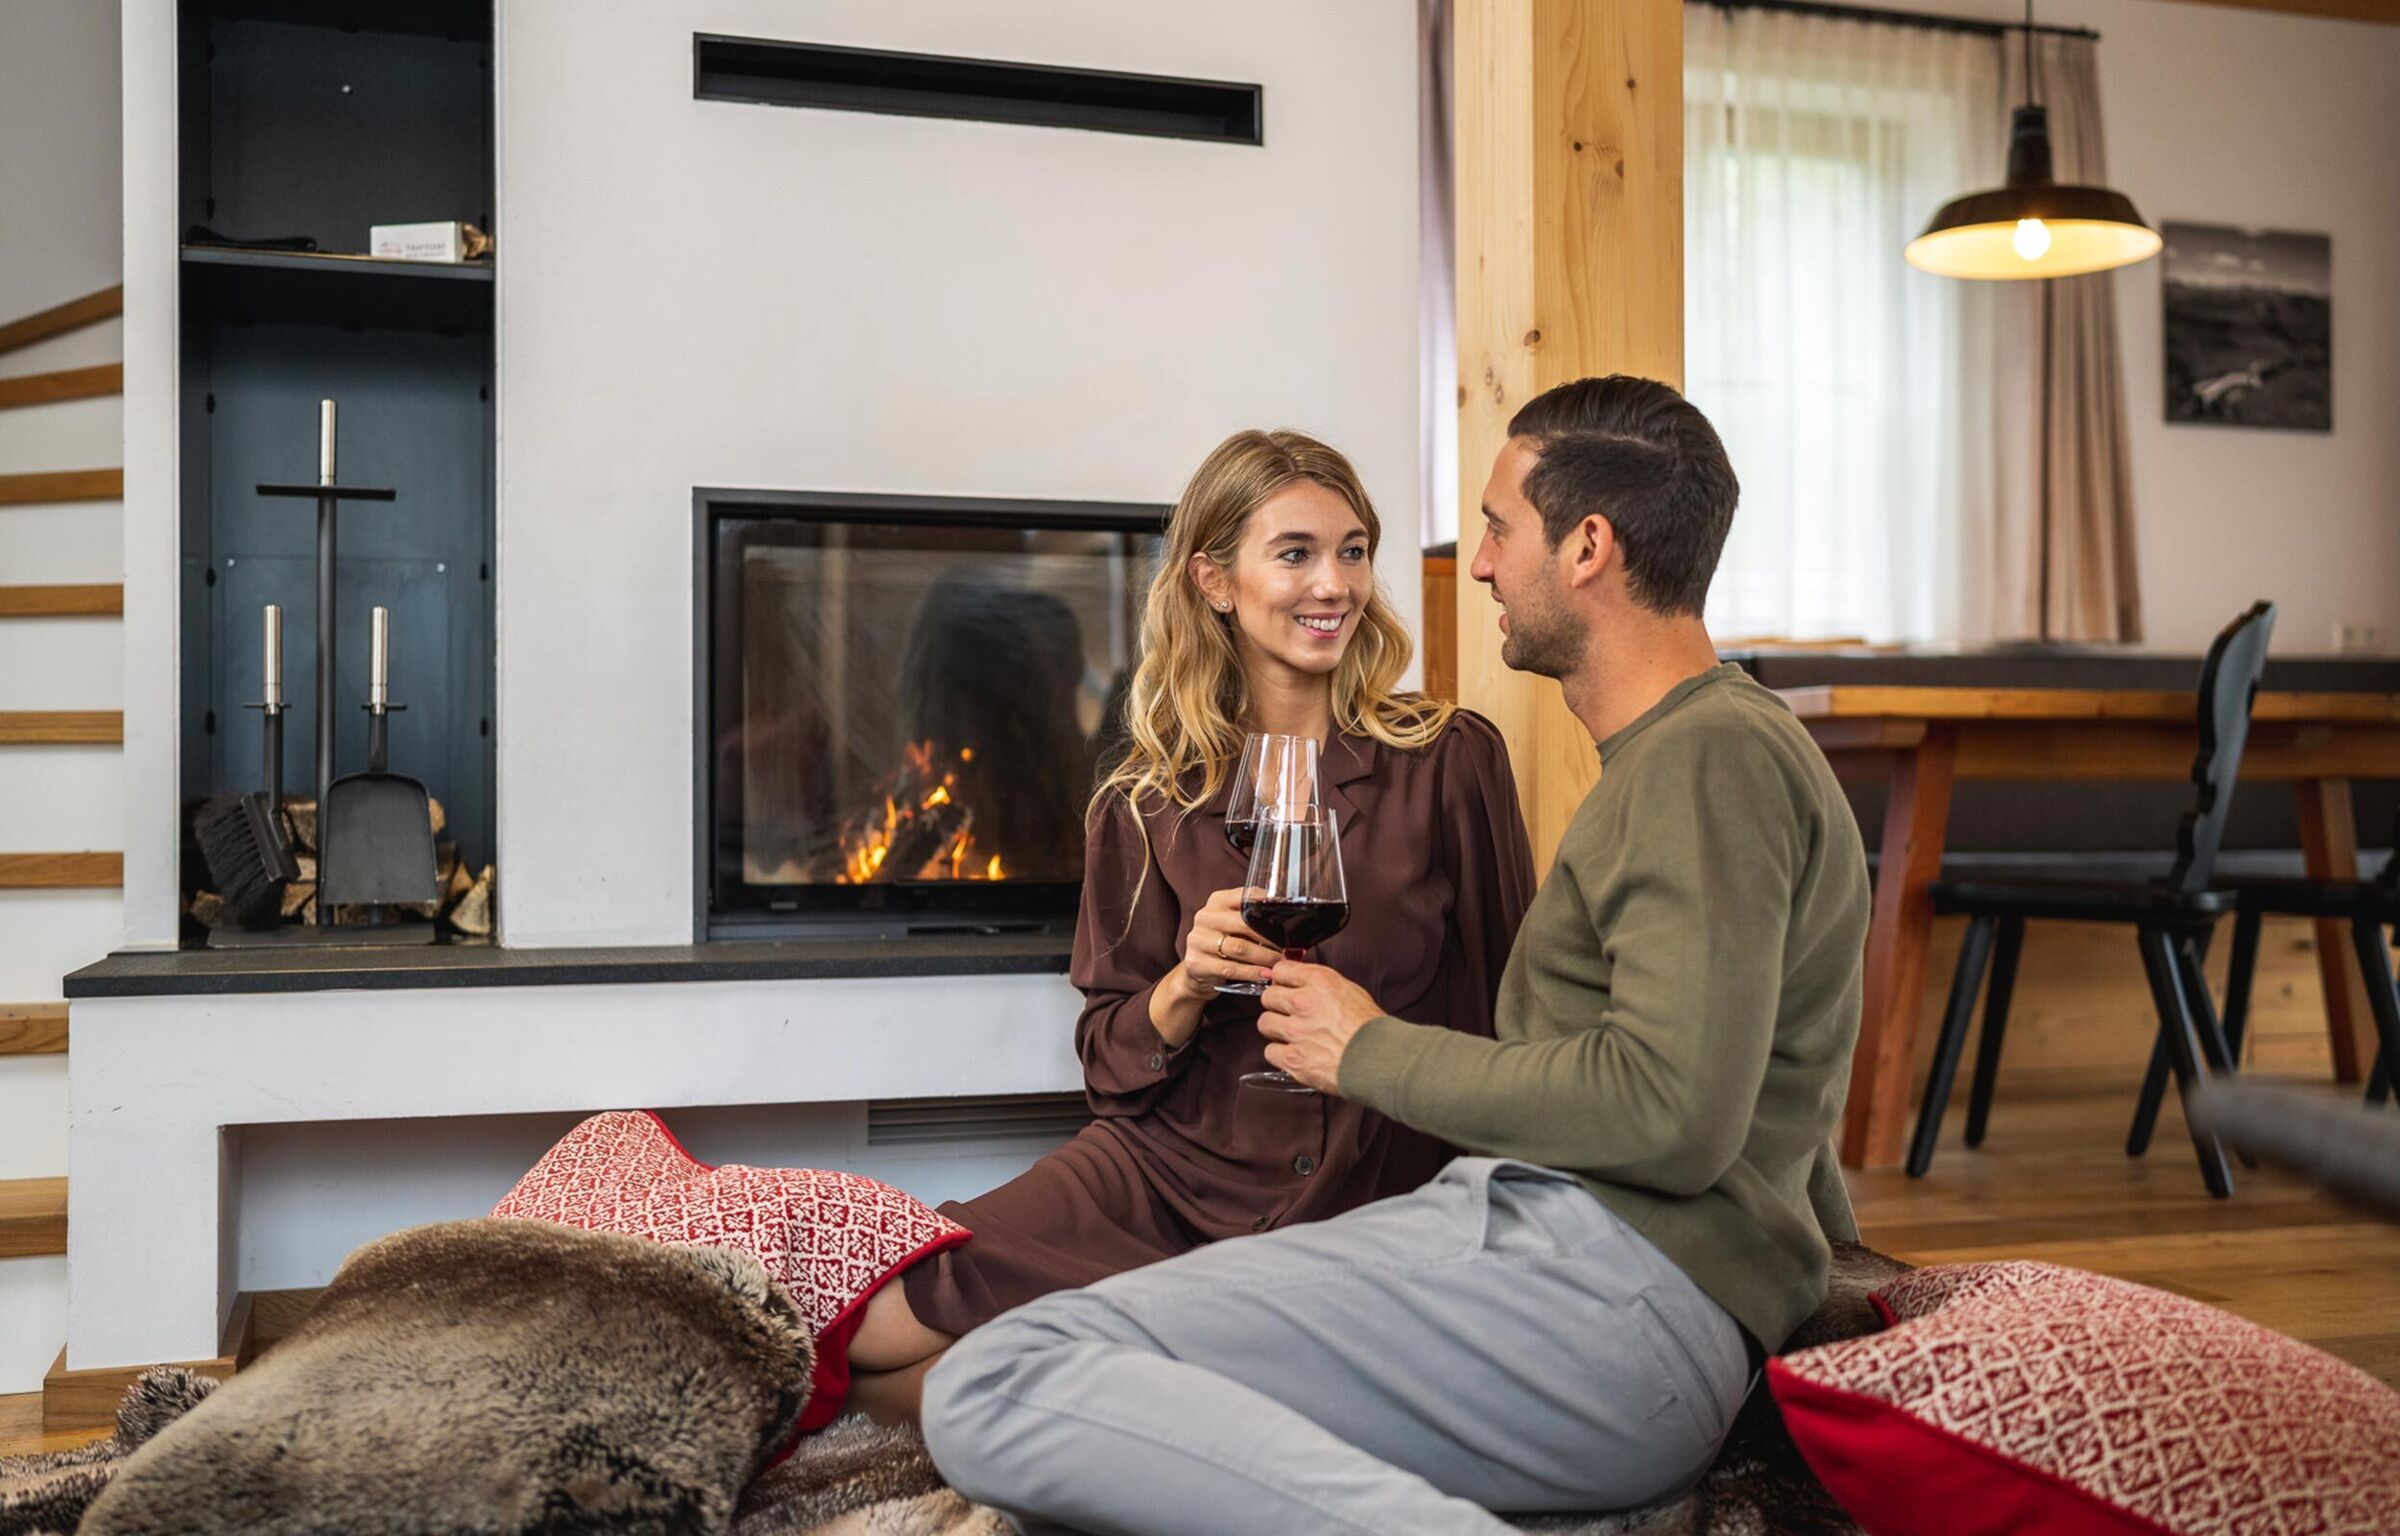 A couple smiling at each other and sitting in front of the fireplace with a glass of red wine